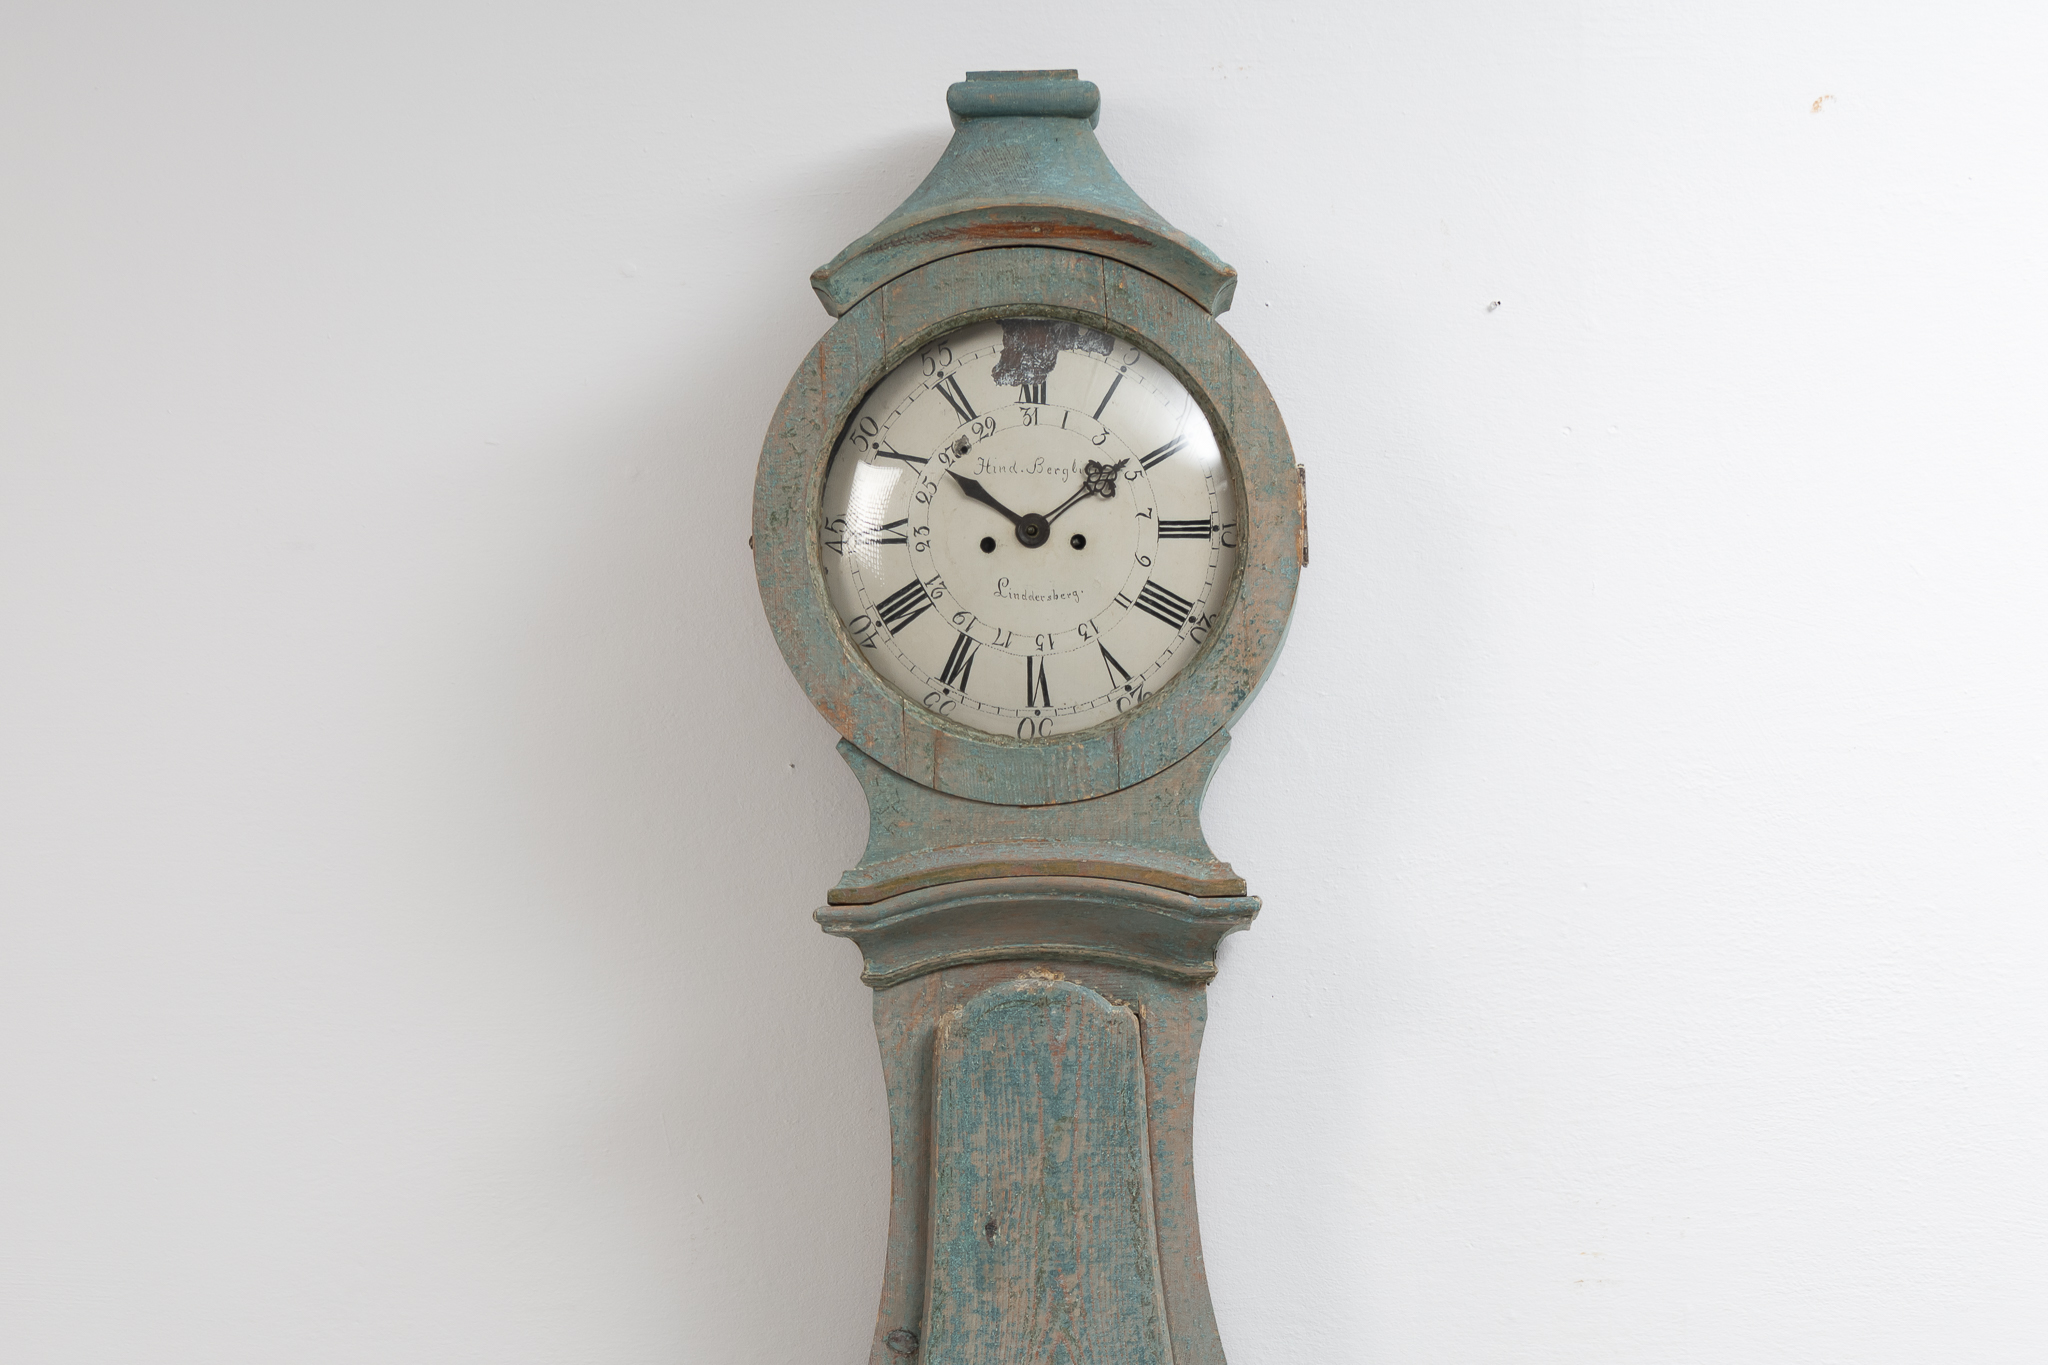 Long case clock from Mälardalen, close to Stockholm in Sweden. The clock is from around 1790 and the case has a classic rococo shape